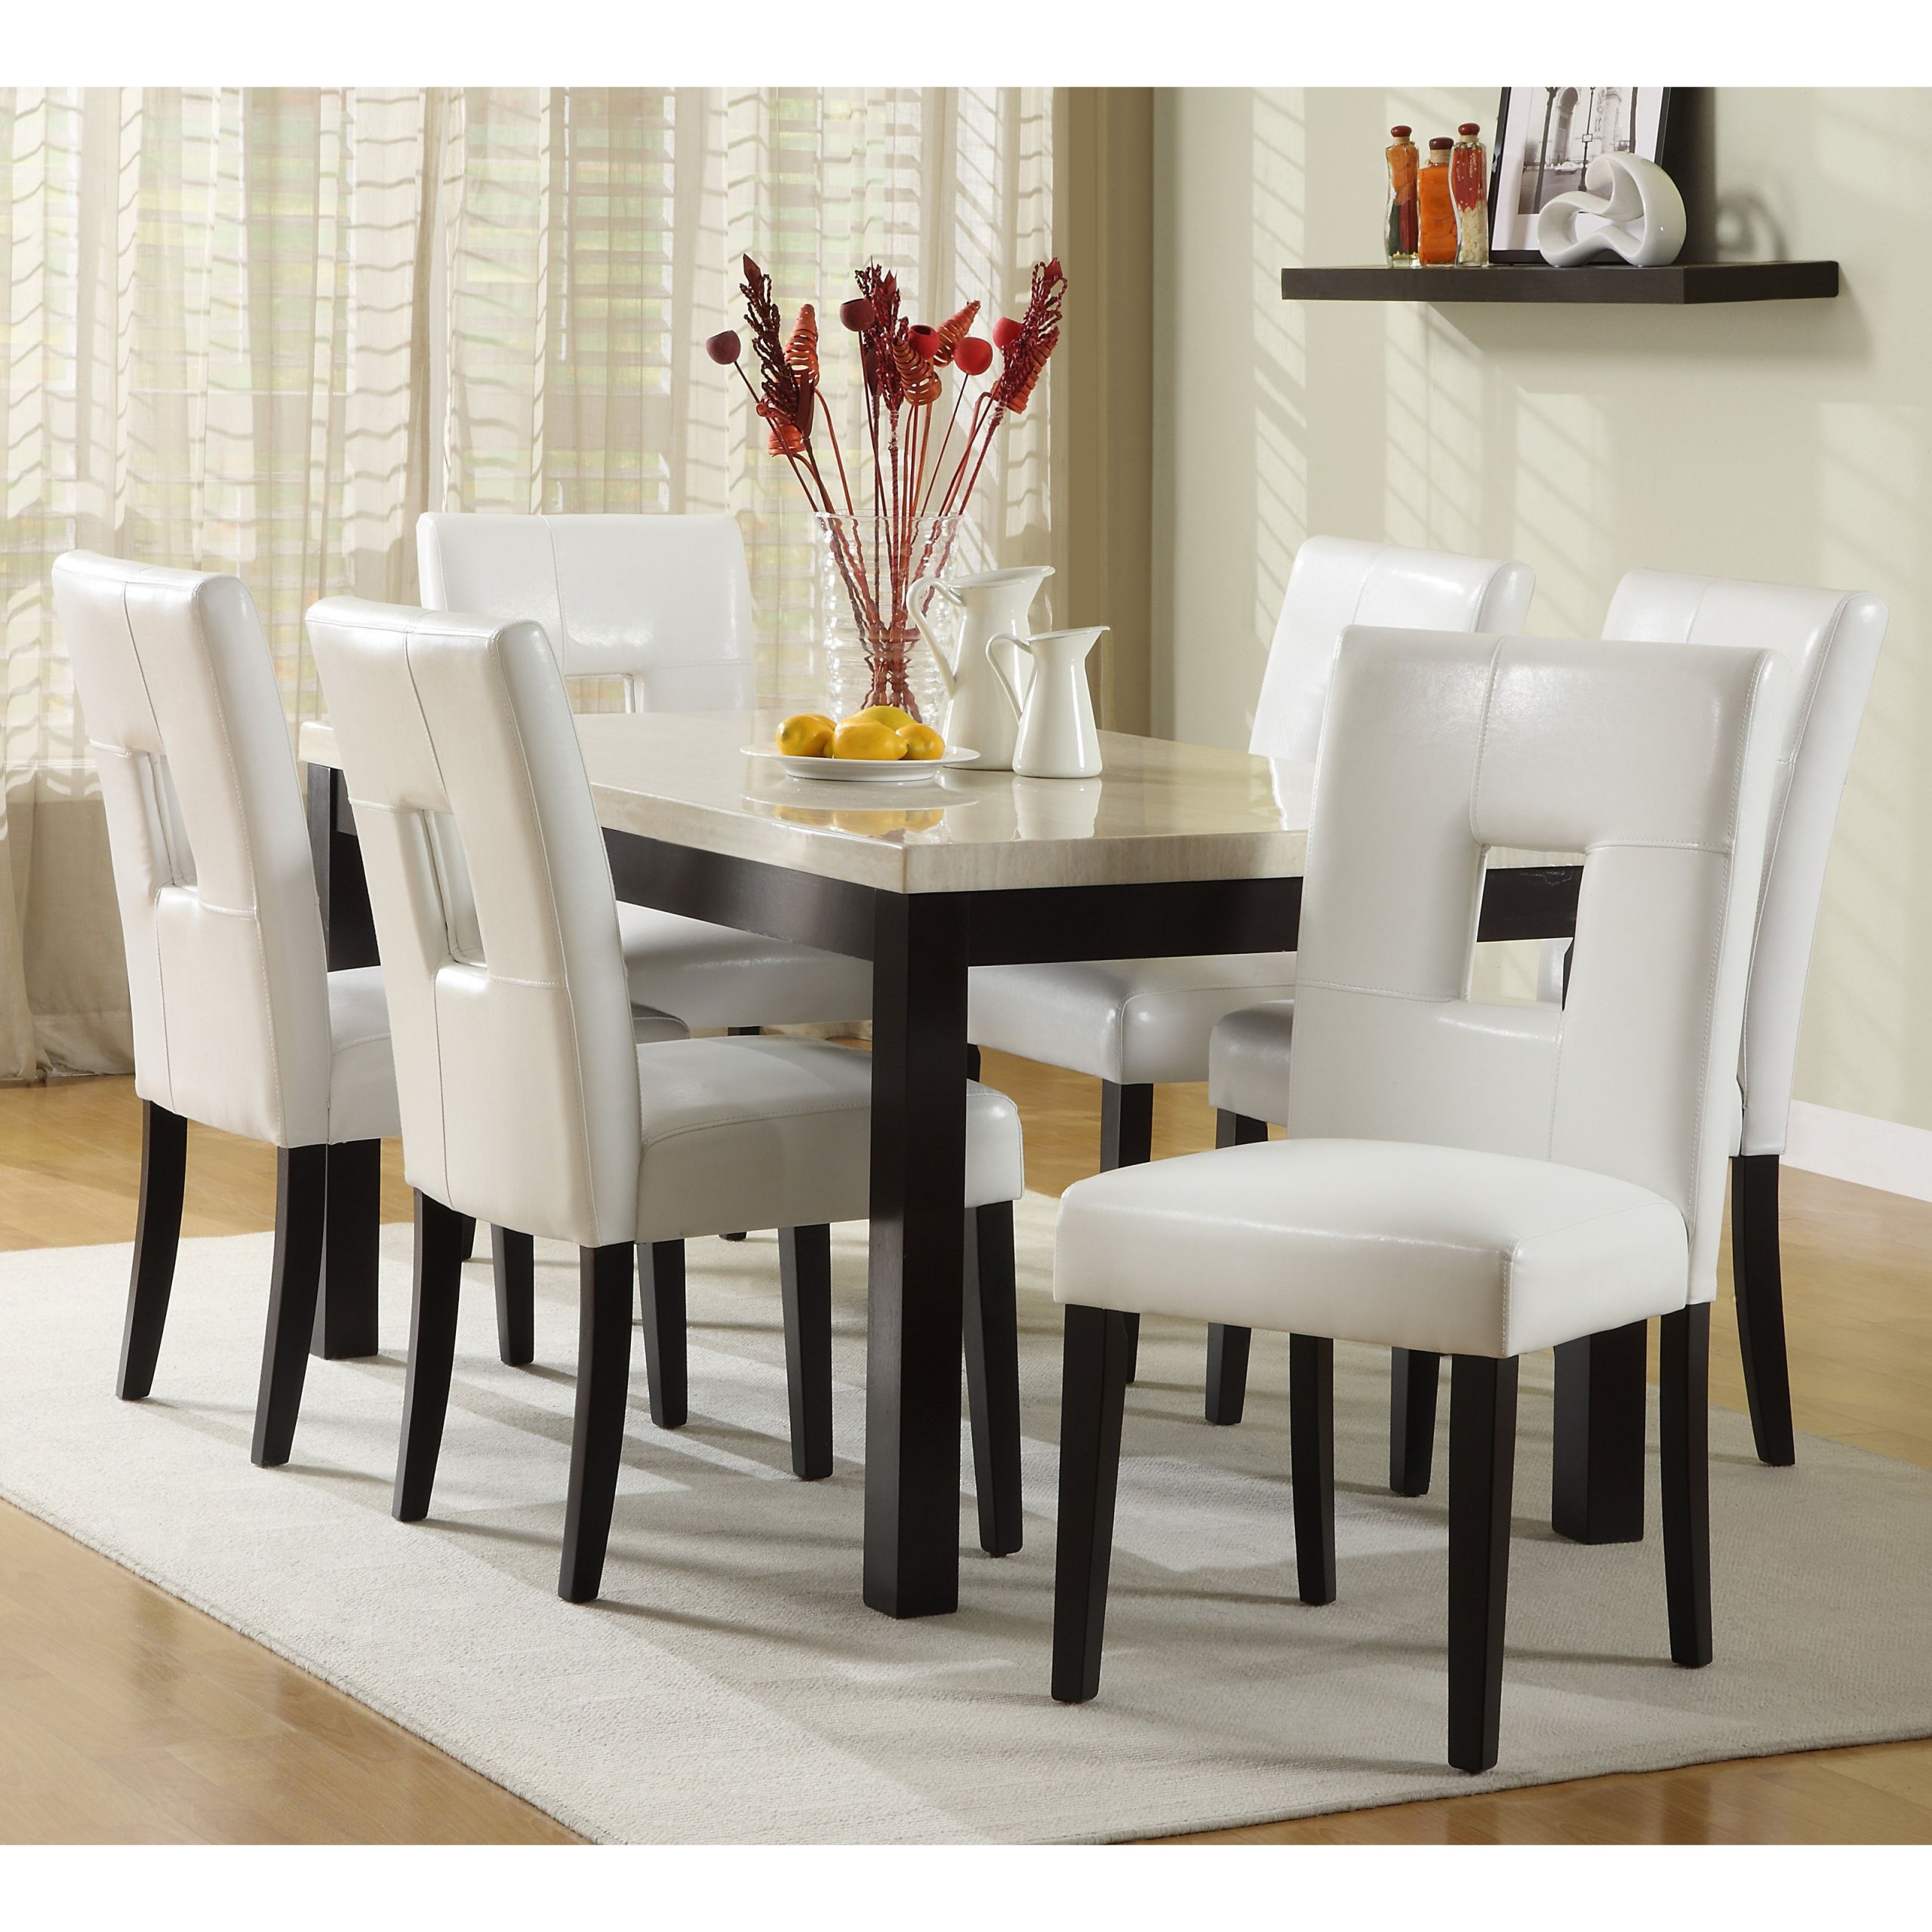 White Kitchen Table Set
 White Round Kitchen Table and Chairs Design – HomesFeed